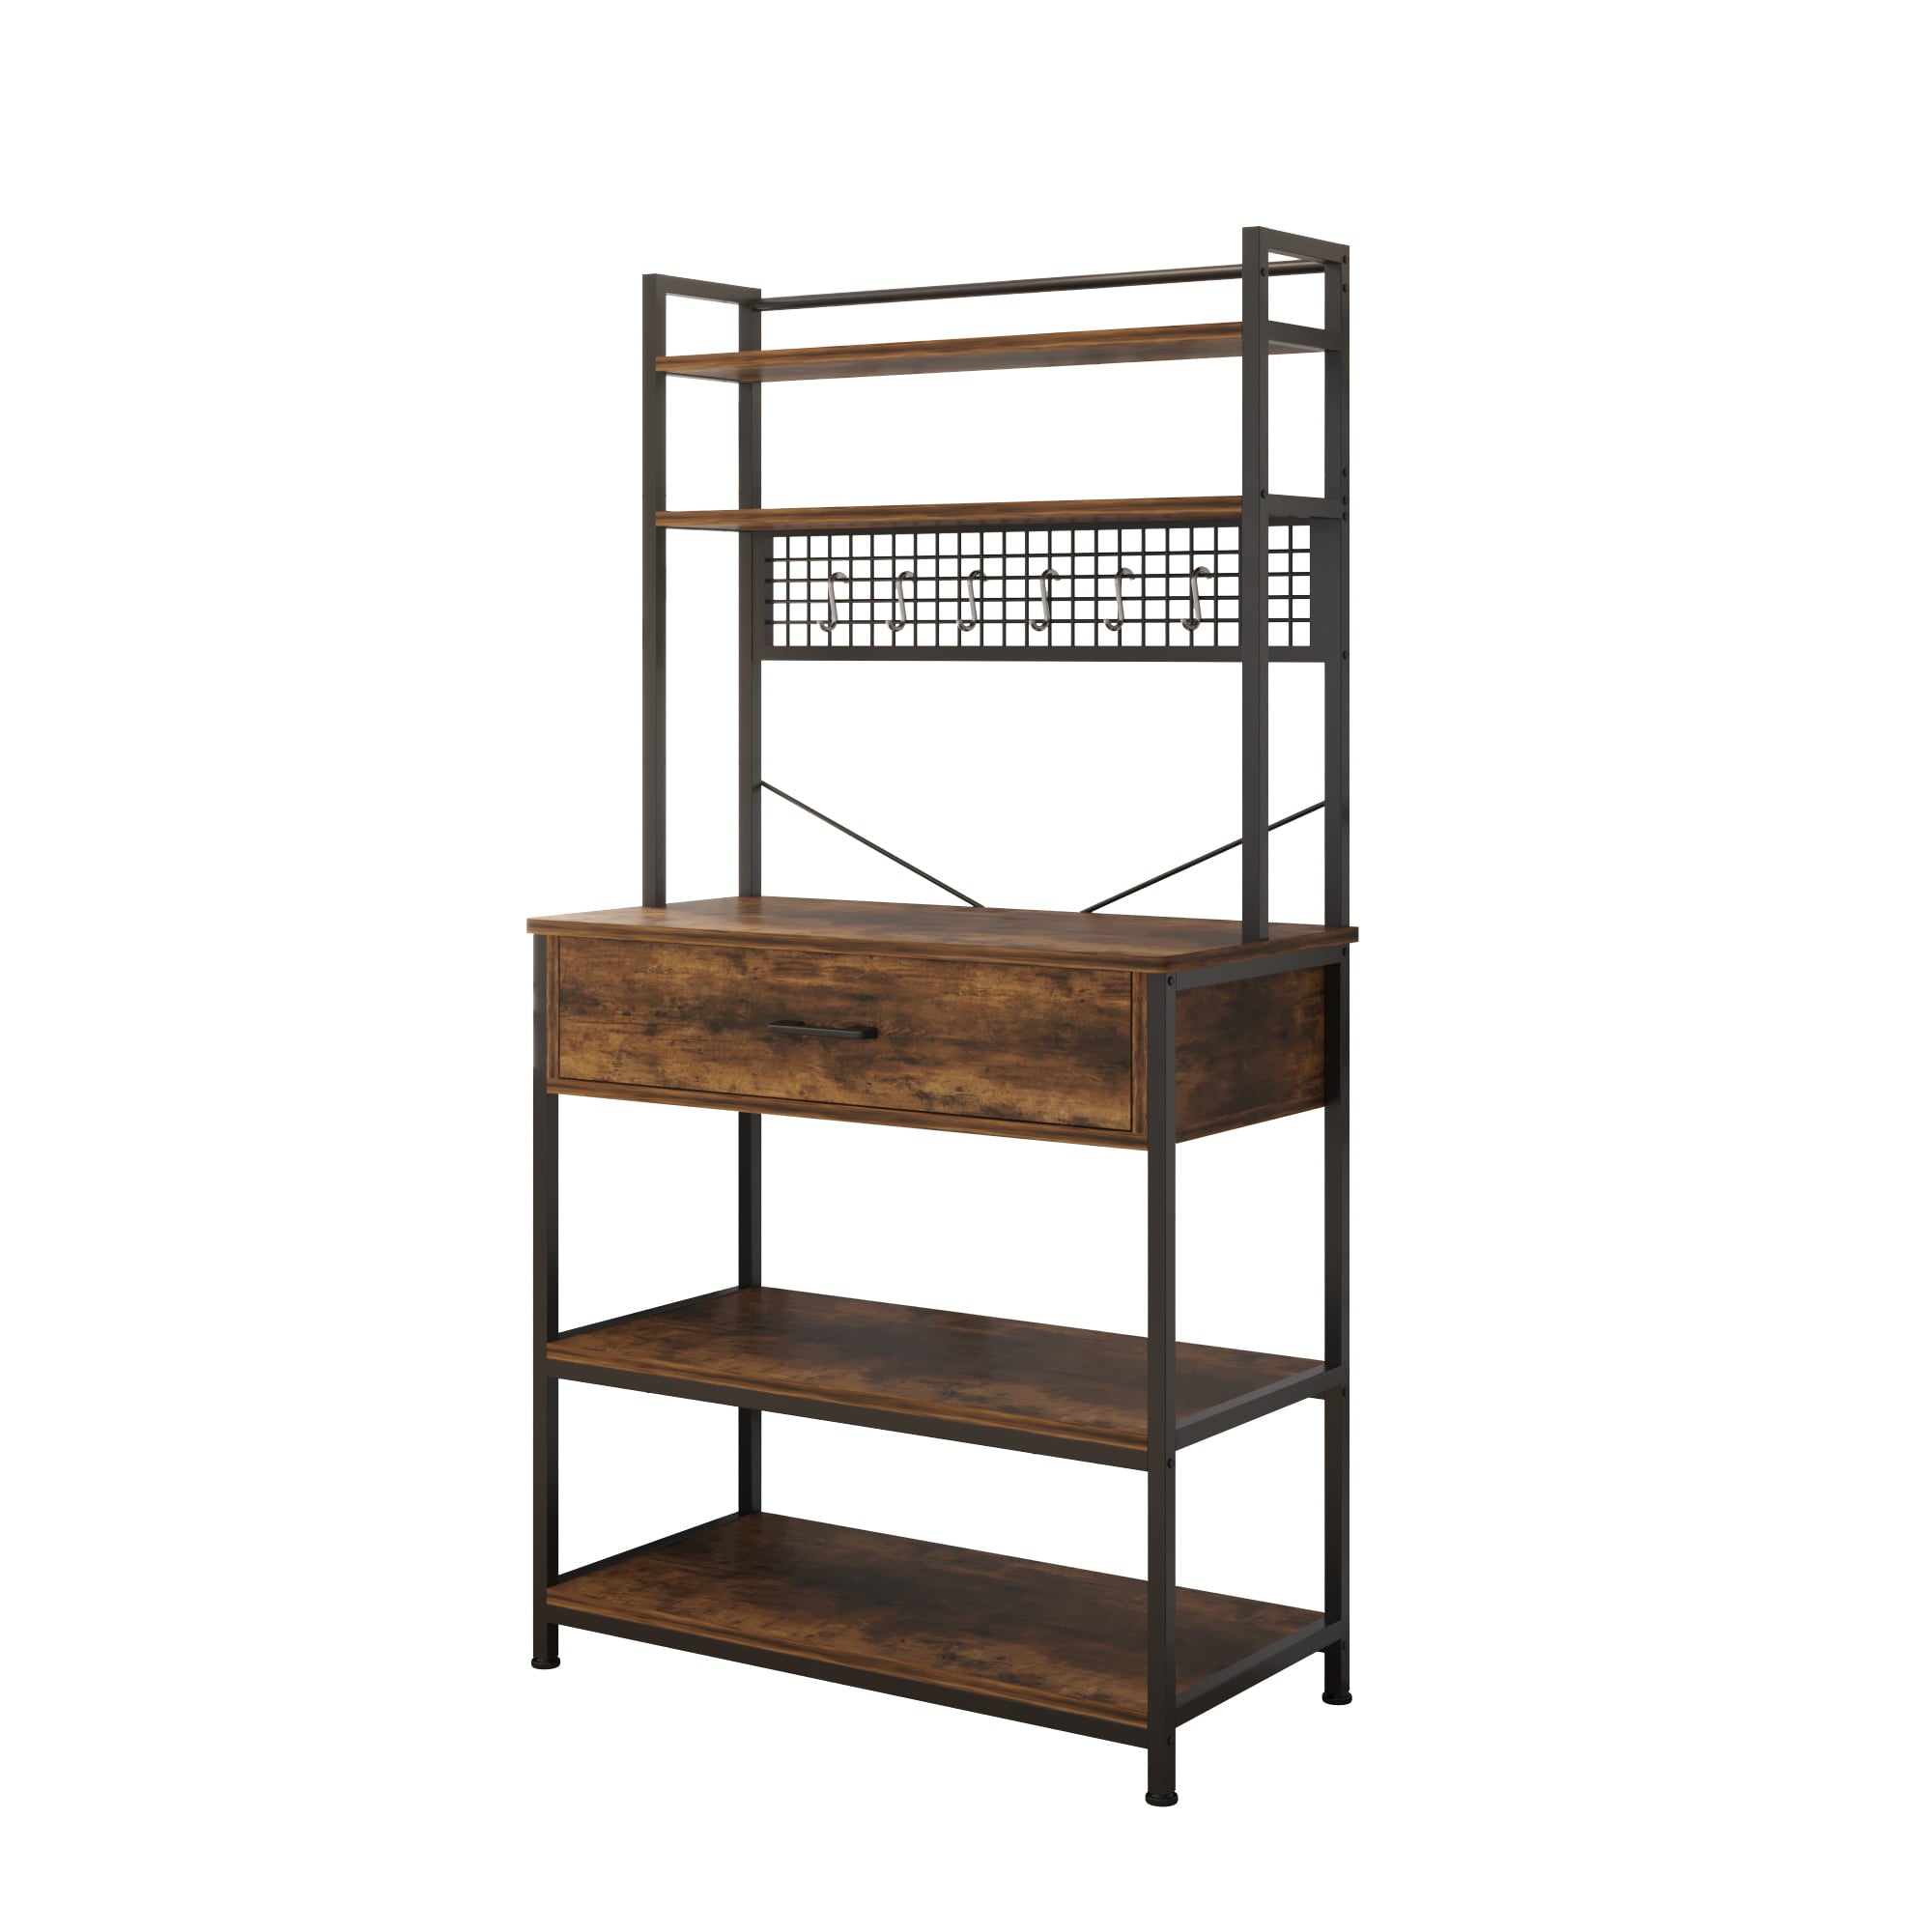 Zimtown 5 Tiers Bakers Rack Industrial Kitchen Island with Storage Drawer， Microwave Oven Cart Coffee Bar Stand W/ Shelf and 10 S-Hooks， Rustic Brown Finish